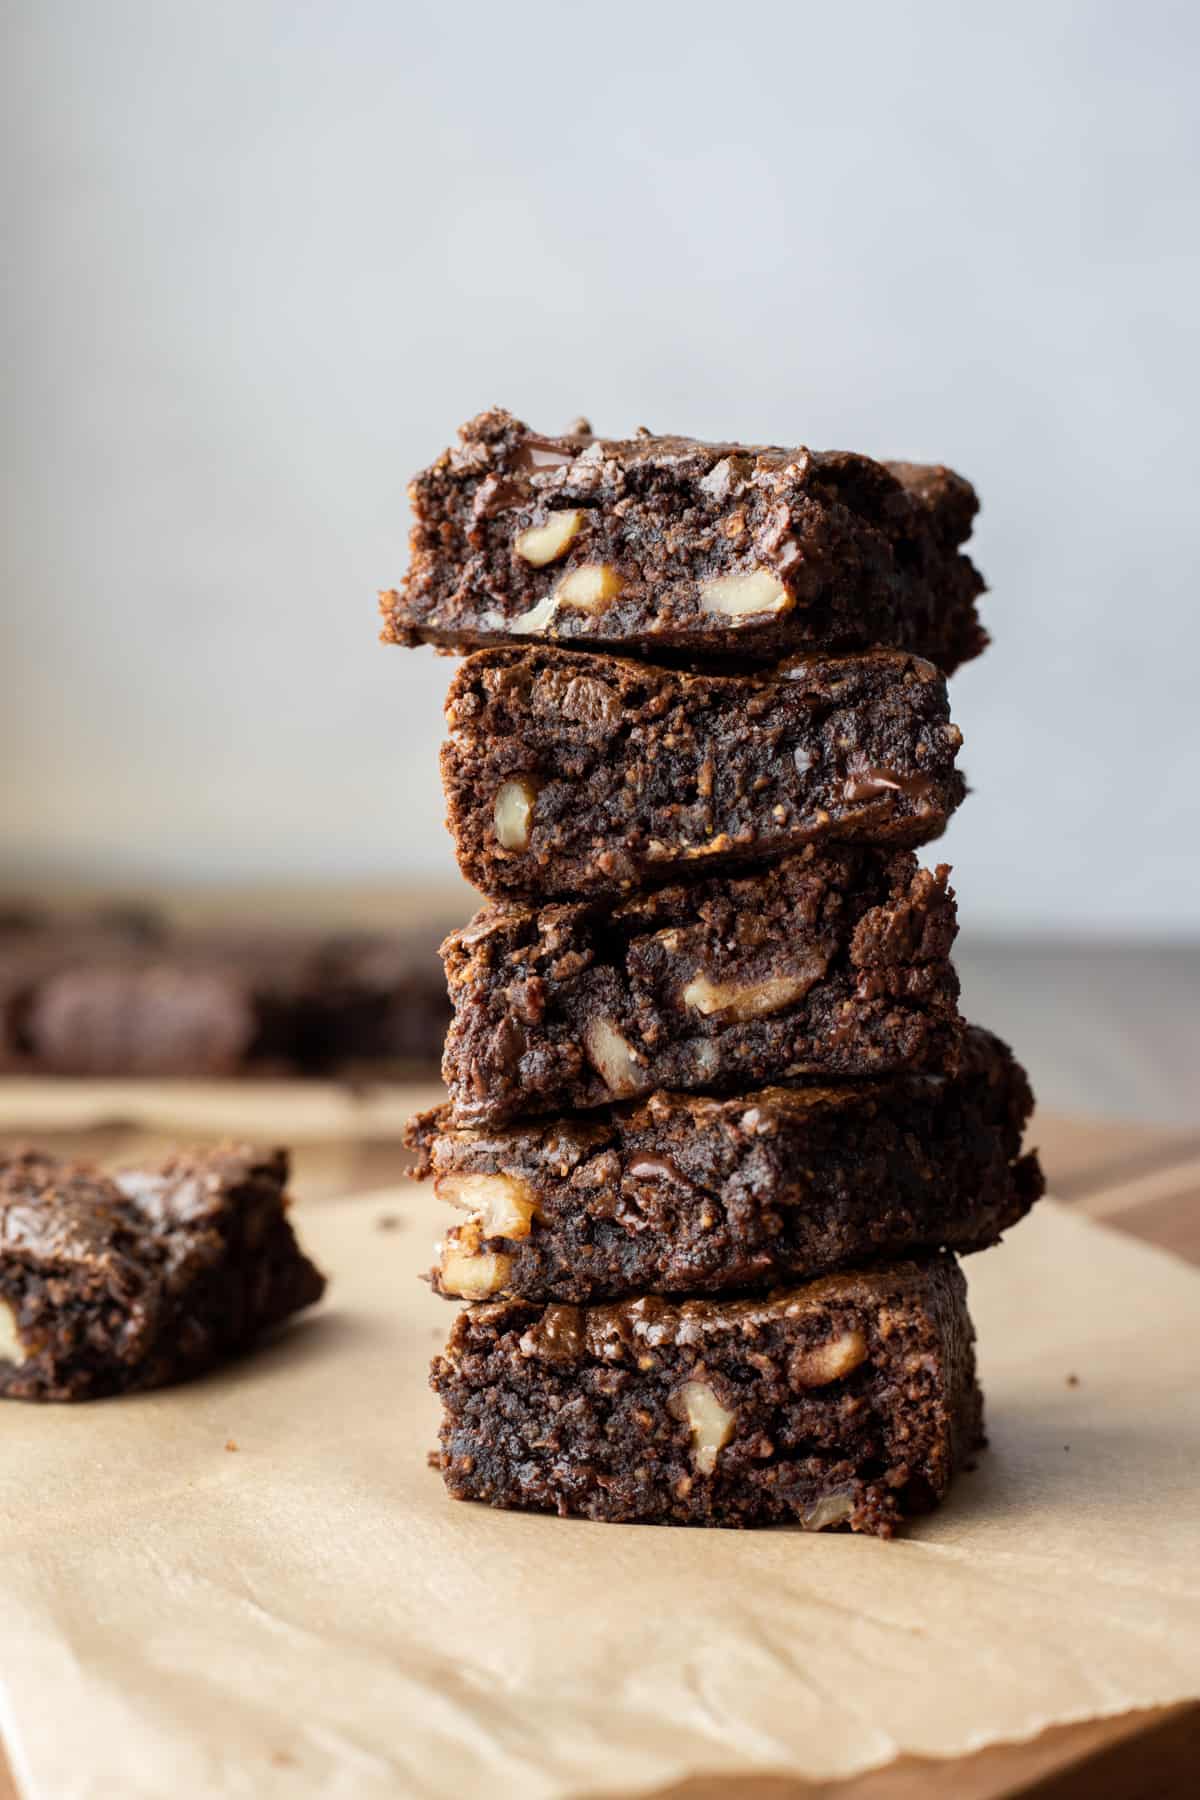 Five vegan chocolate brownies with walnuts stacked and resting on a cutting board.